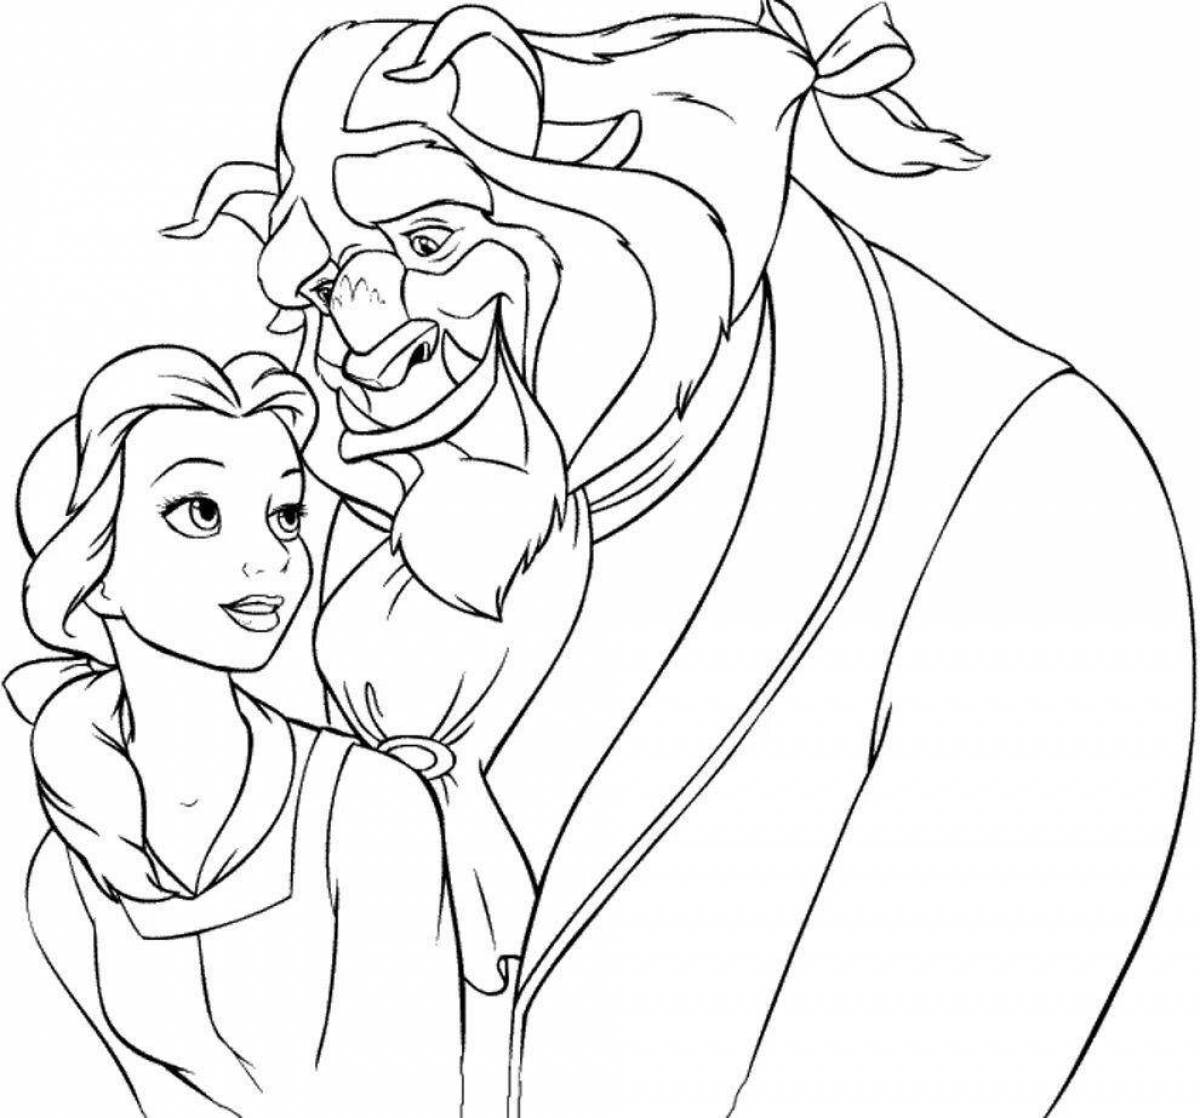 Charming belle and the monster coloring book